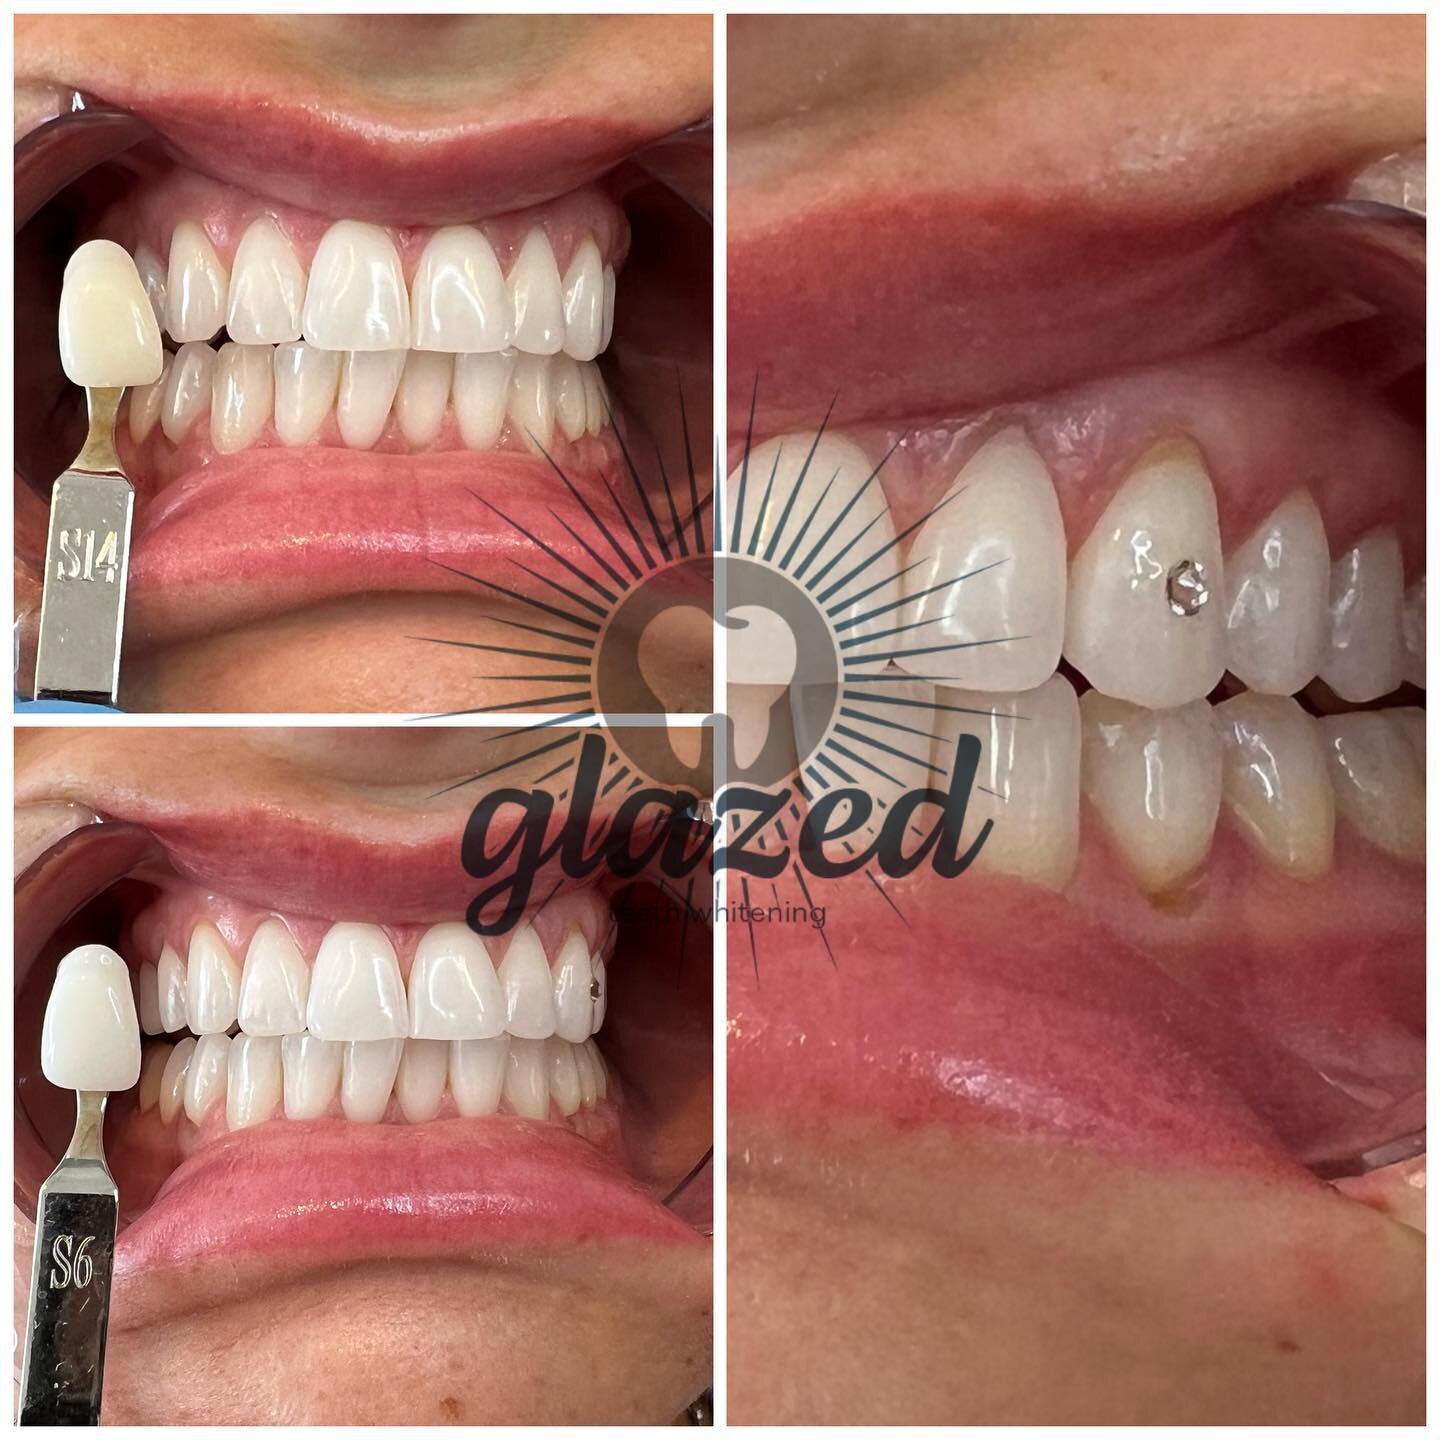 @glazedwhitening on Sundays at Lush Beauty Bar ✨ 

Holidays and amazing festivities coming up this fall, get picture perfect! 

Add a tooth gem for that extra sparkle 😍

DM @glazedwhitening to schedule or book online 🪄

#whiteteethelmwoodpark #teet